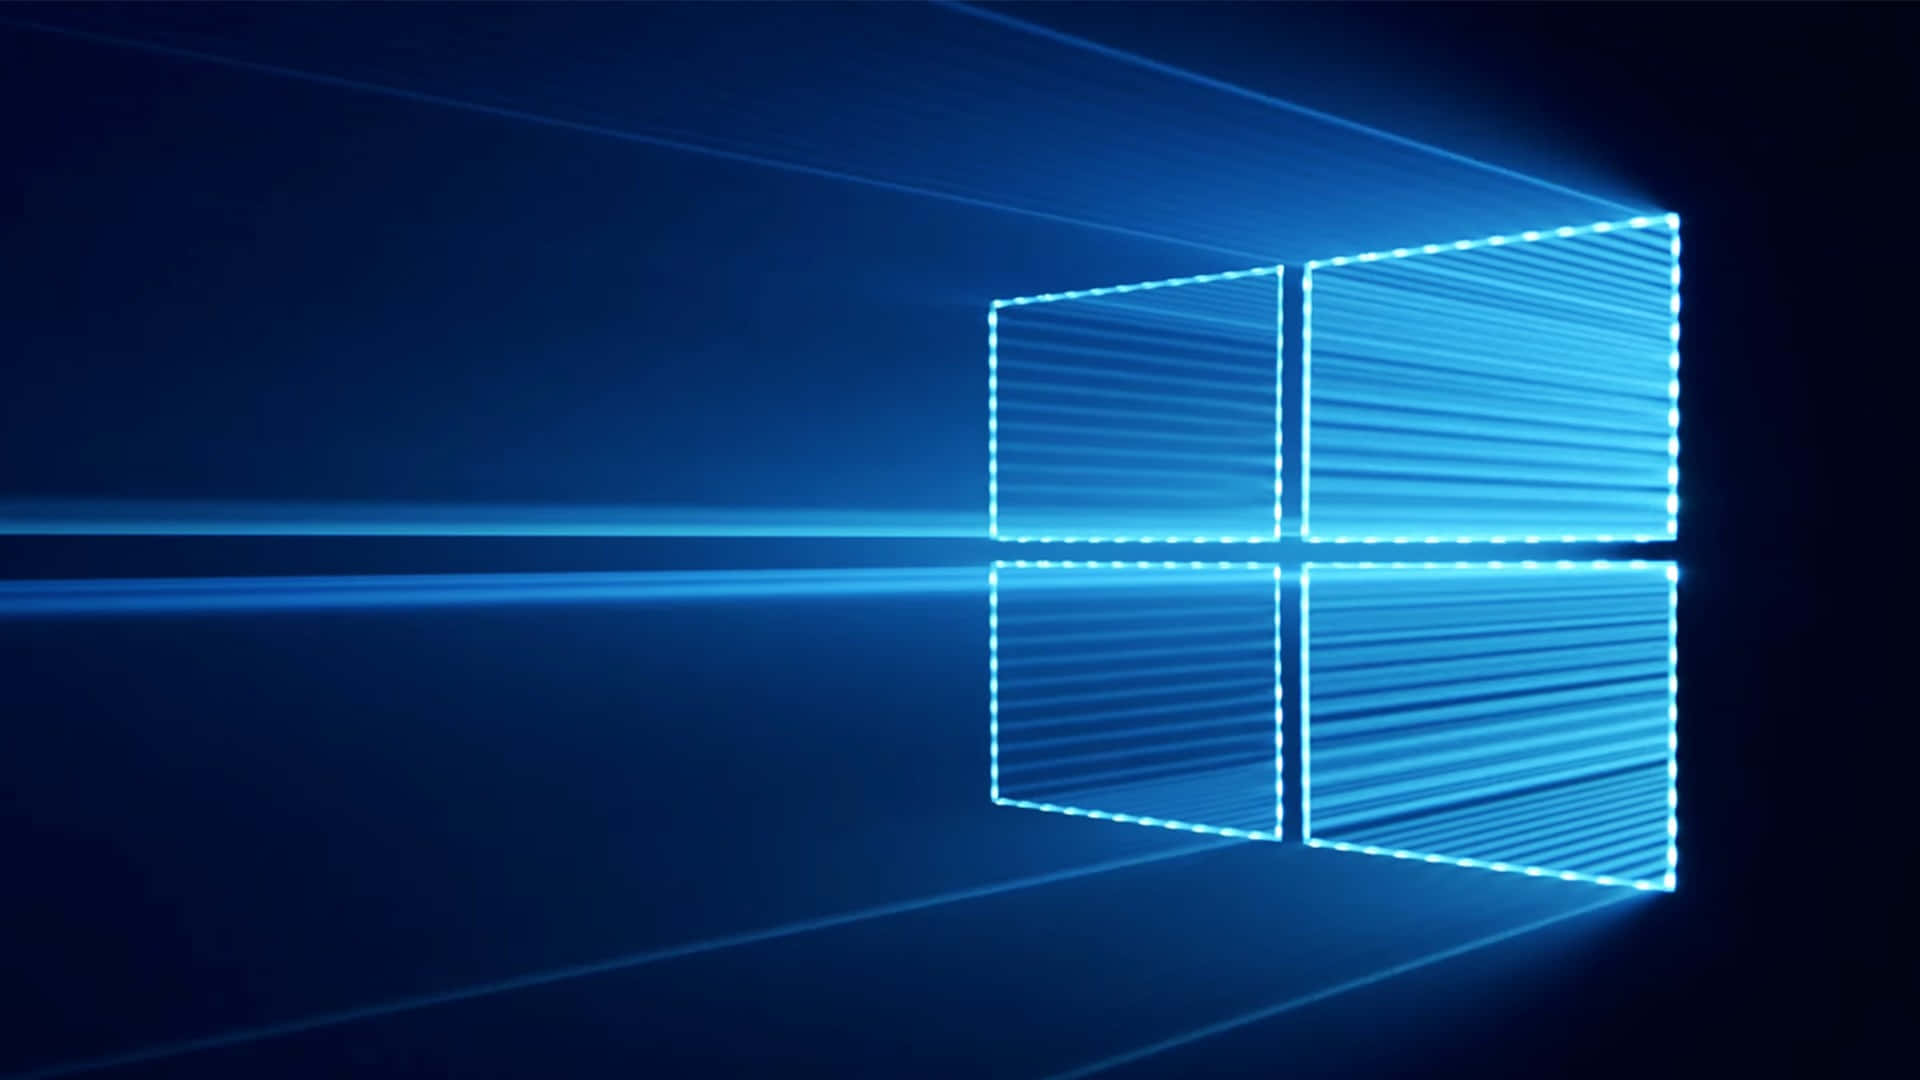 Get the Most Out of Windows 10